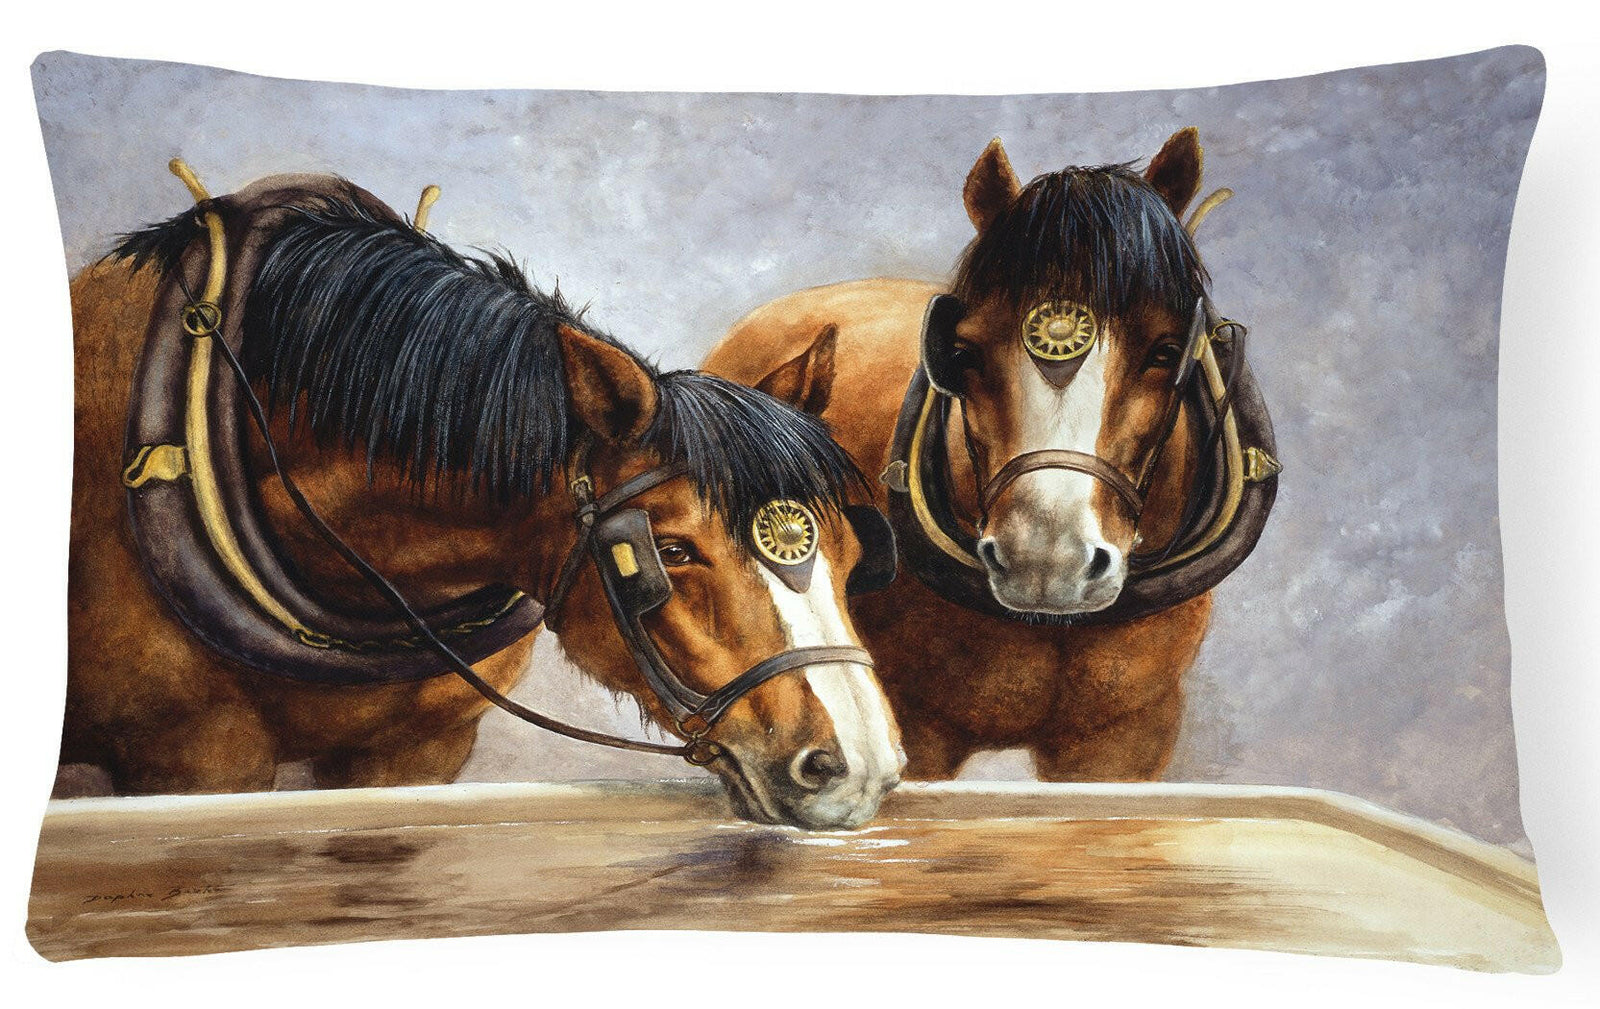 Horses Taking a Drink of Water Fabric Decorative Pillow BDBA0119PW1216 by Caroline's Treasures